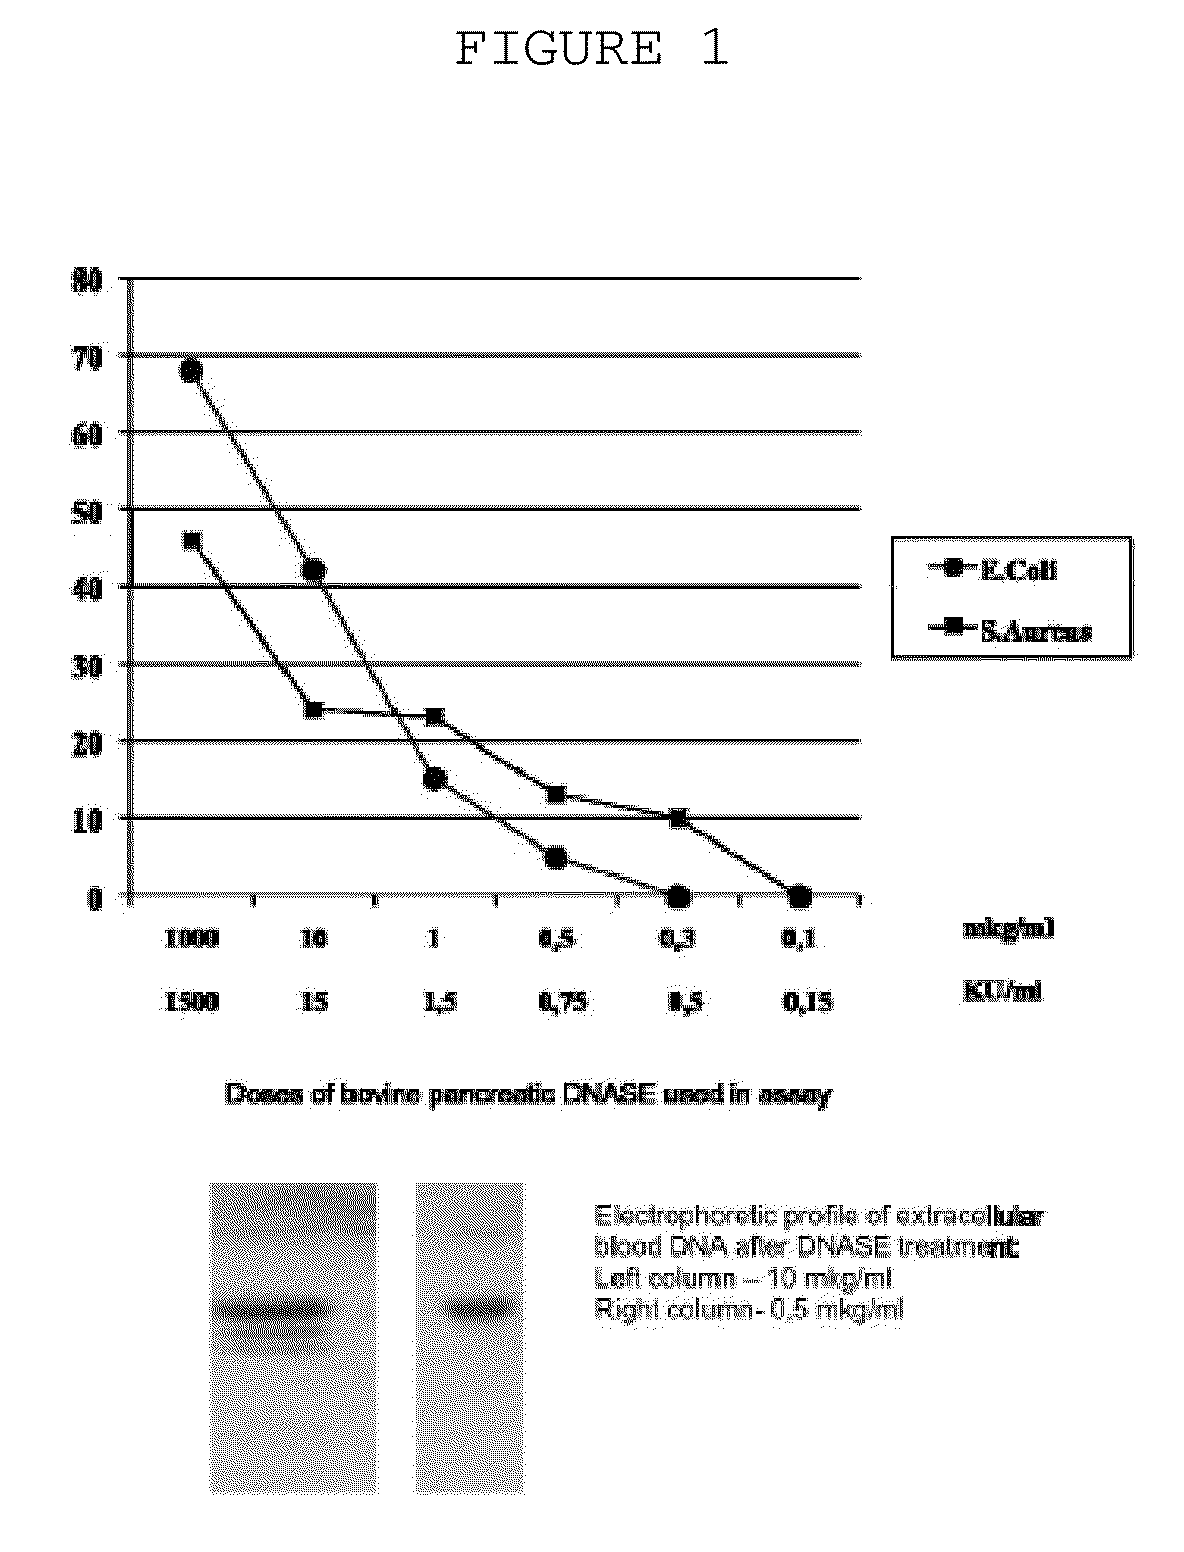 Method for Treating Systemic Bacterial, Fungal and Protozoan Infection